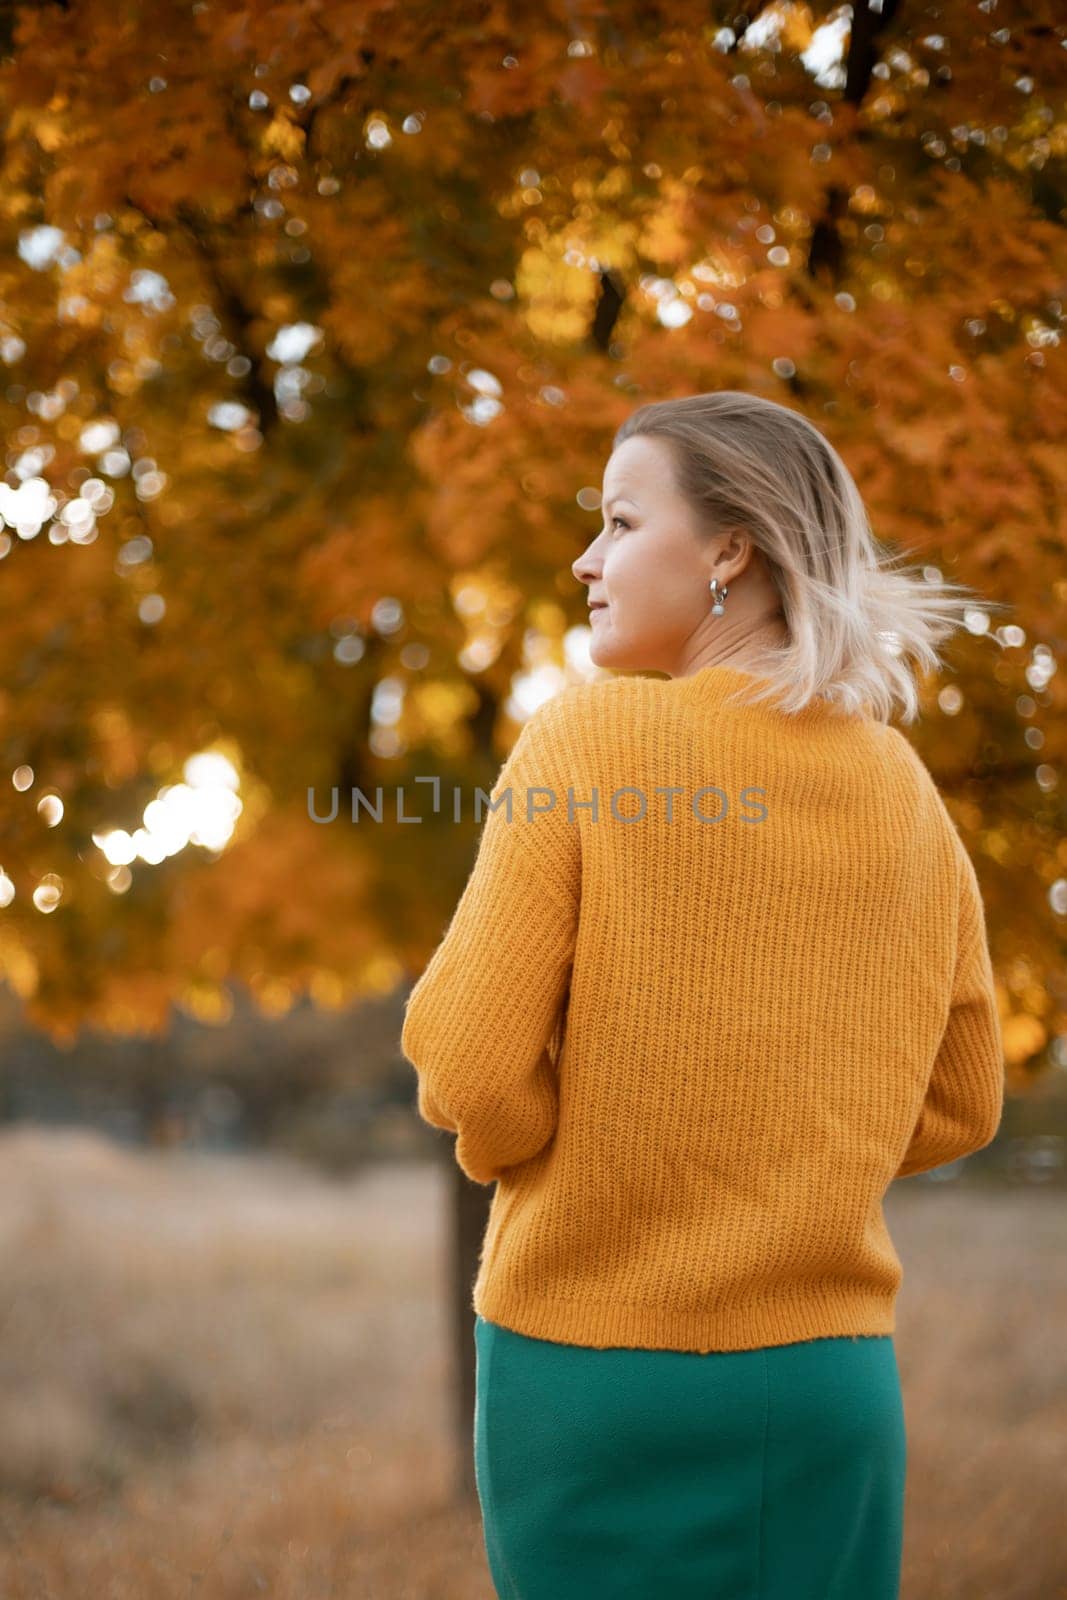 autumn woman in a yellow sweater and green skirt, against the background of an autumn tree.